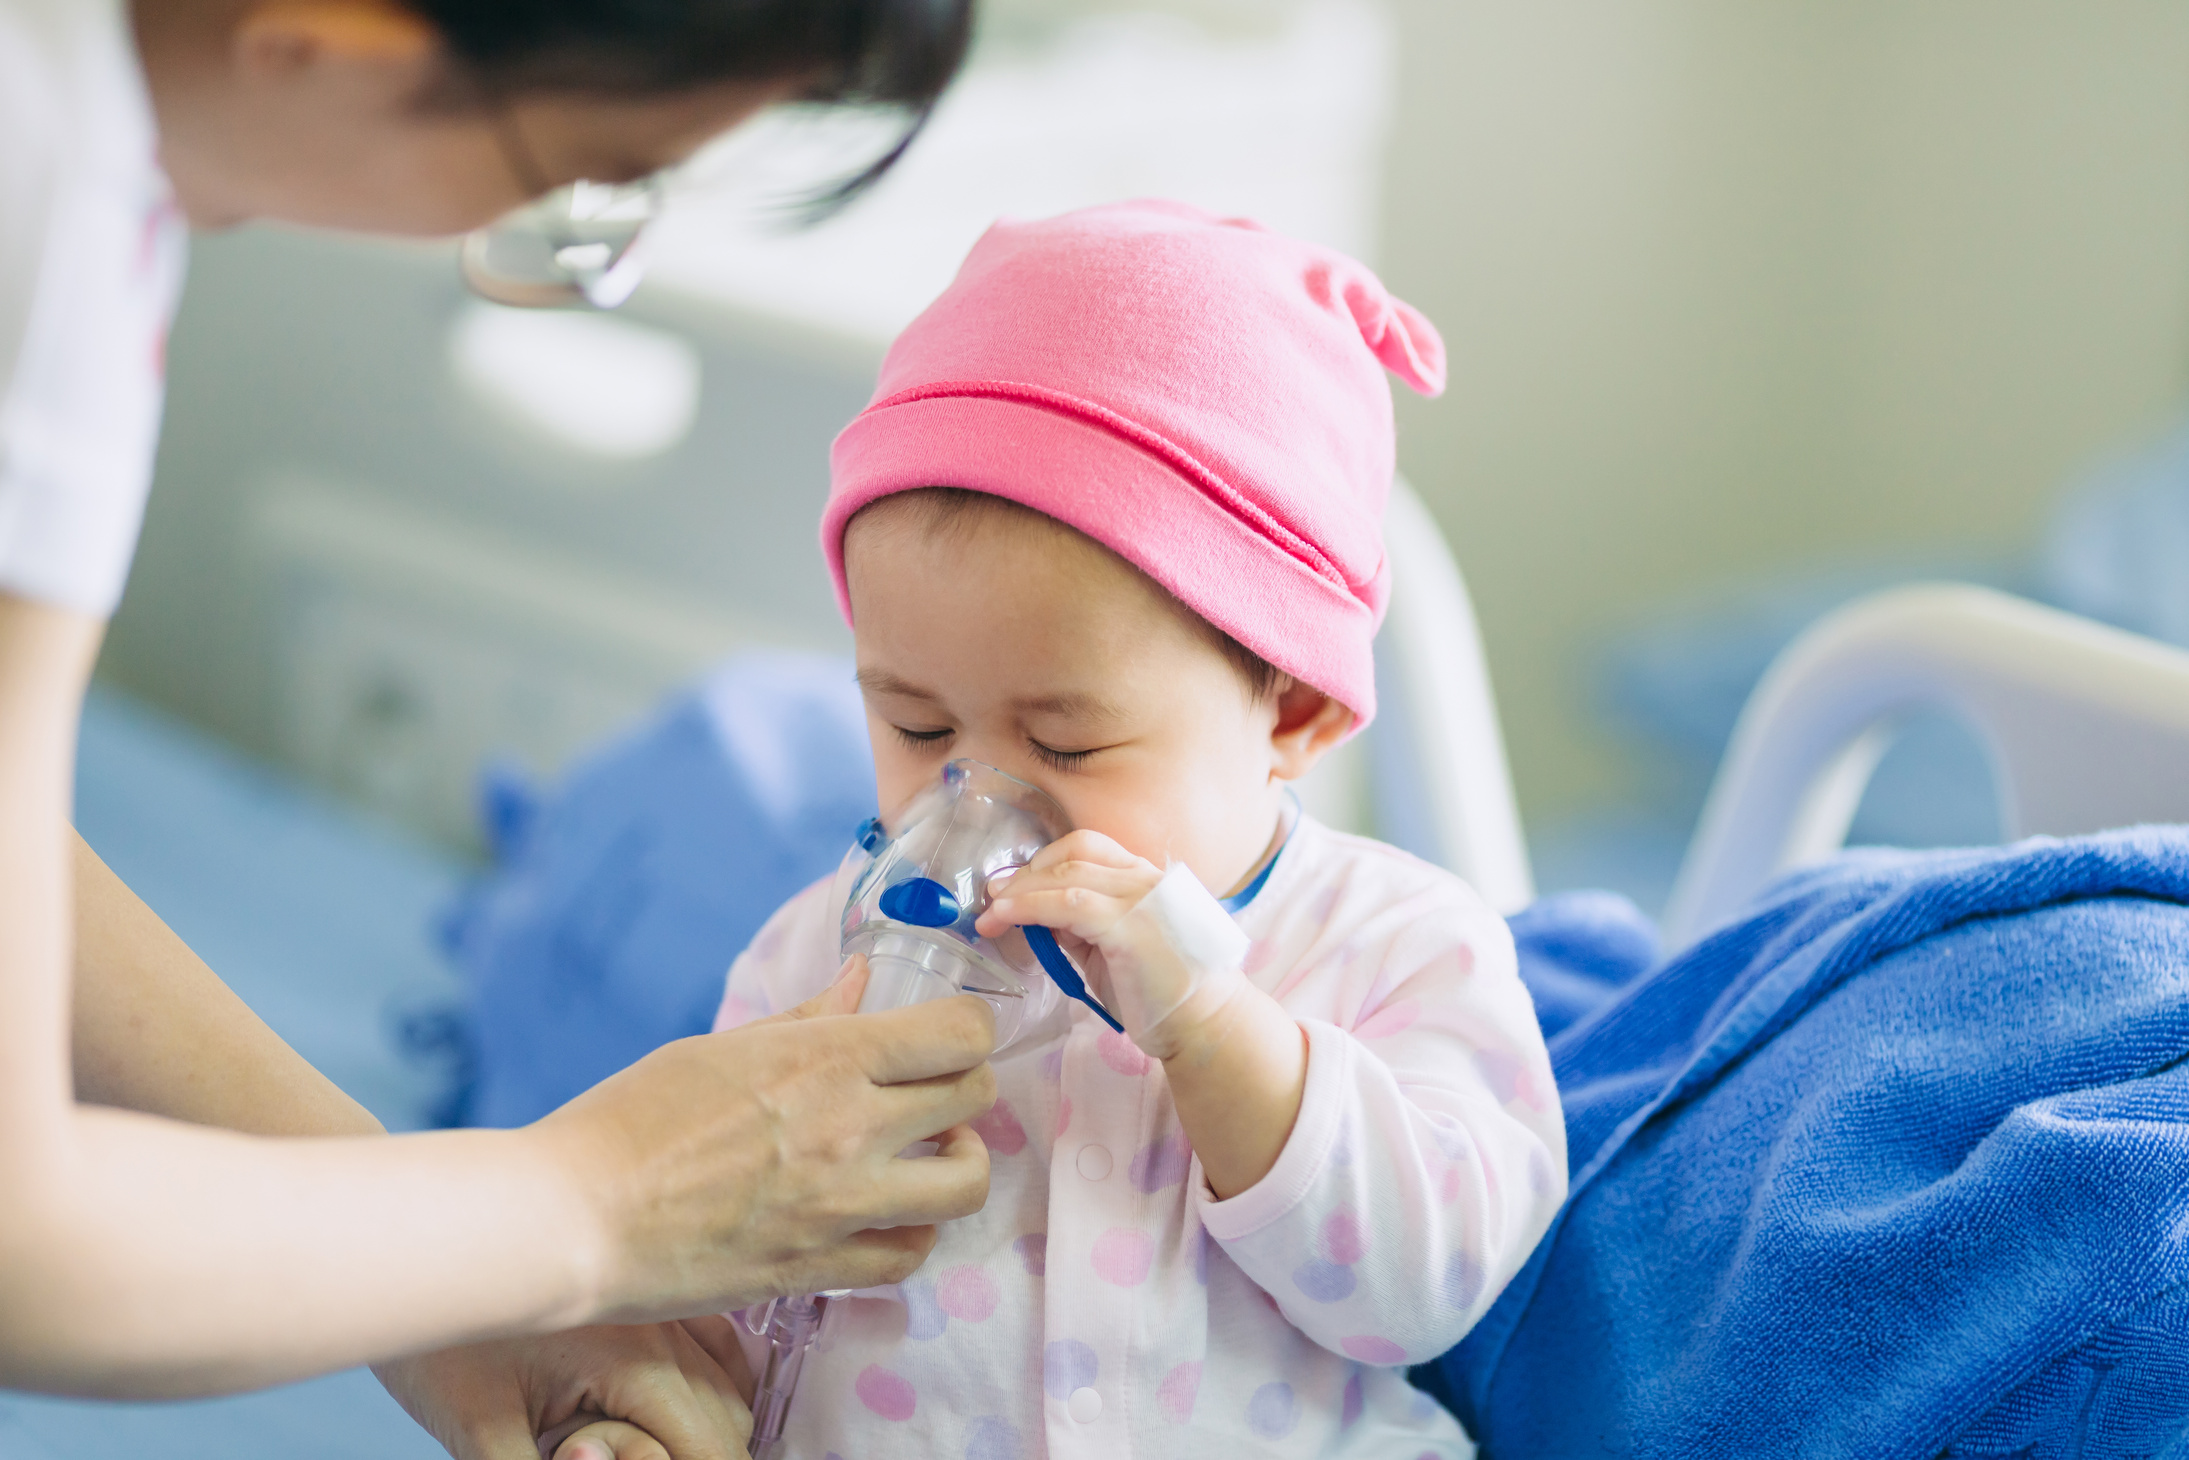 Doctor treatment a child who sick, has trouble breathing